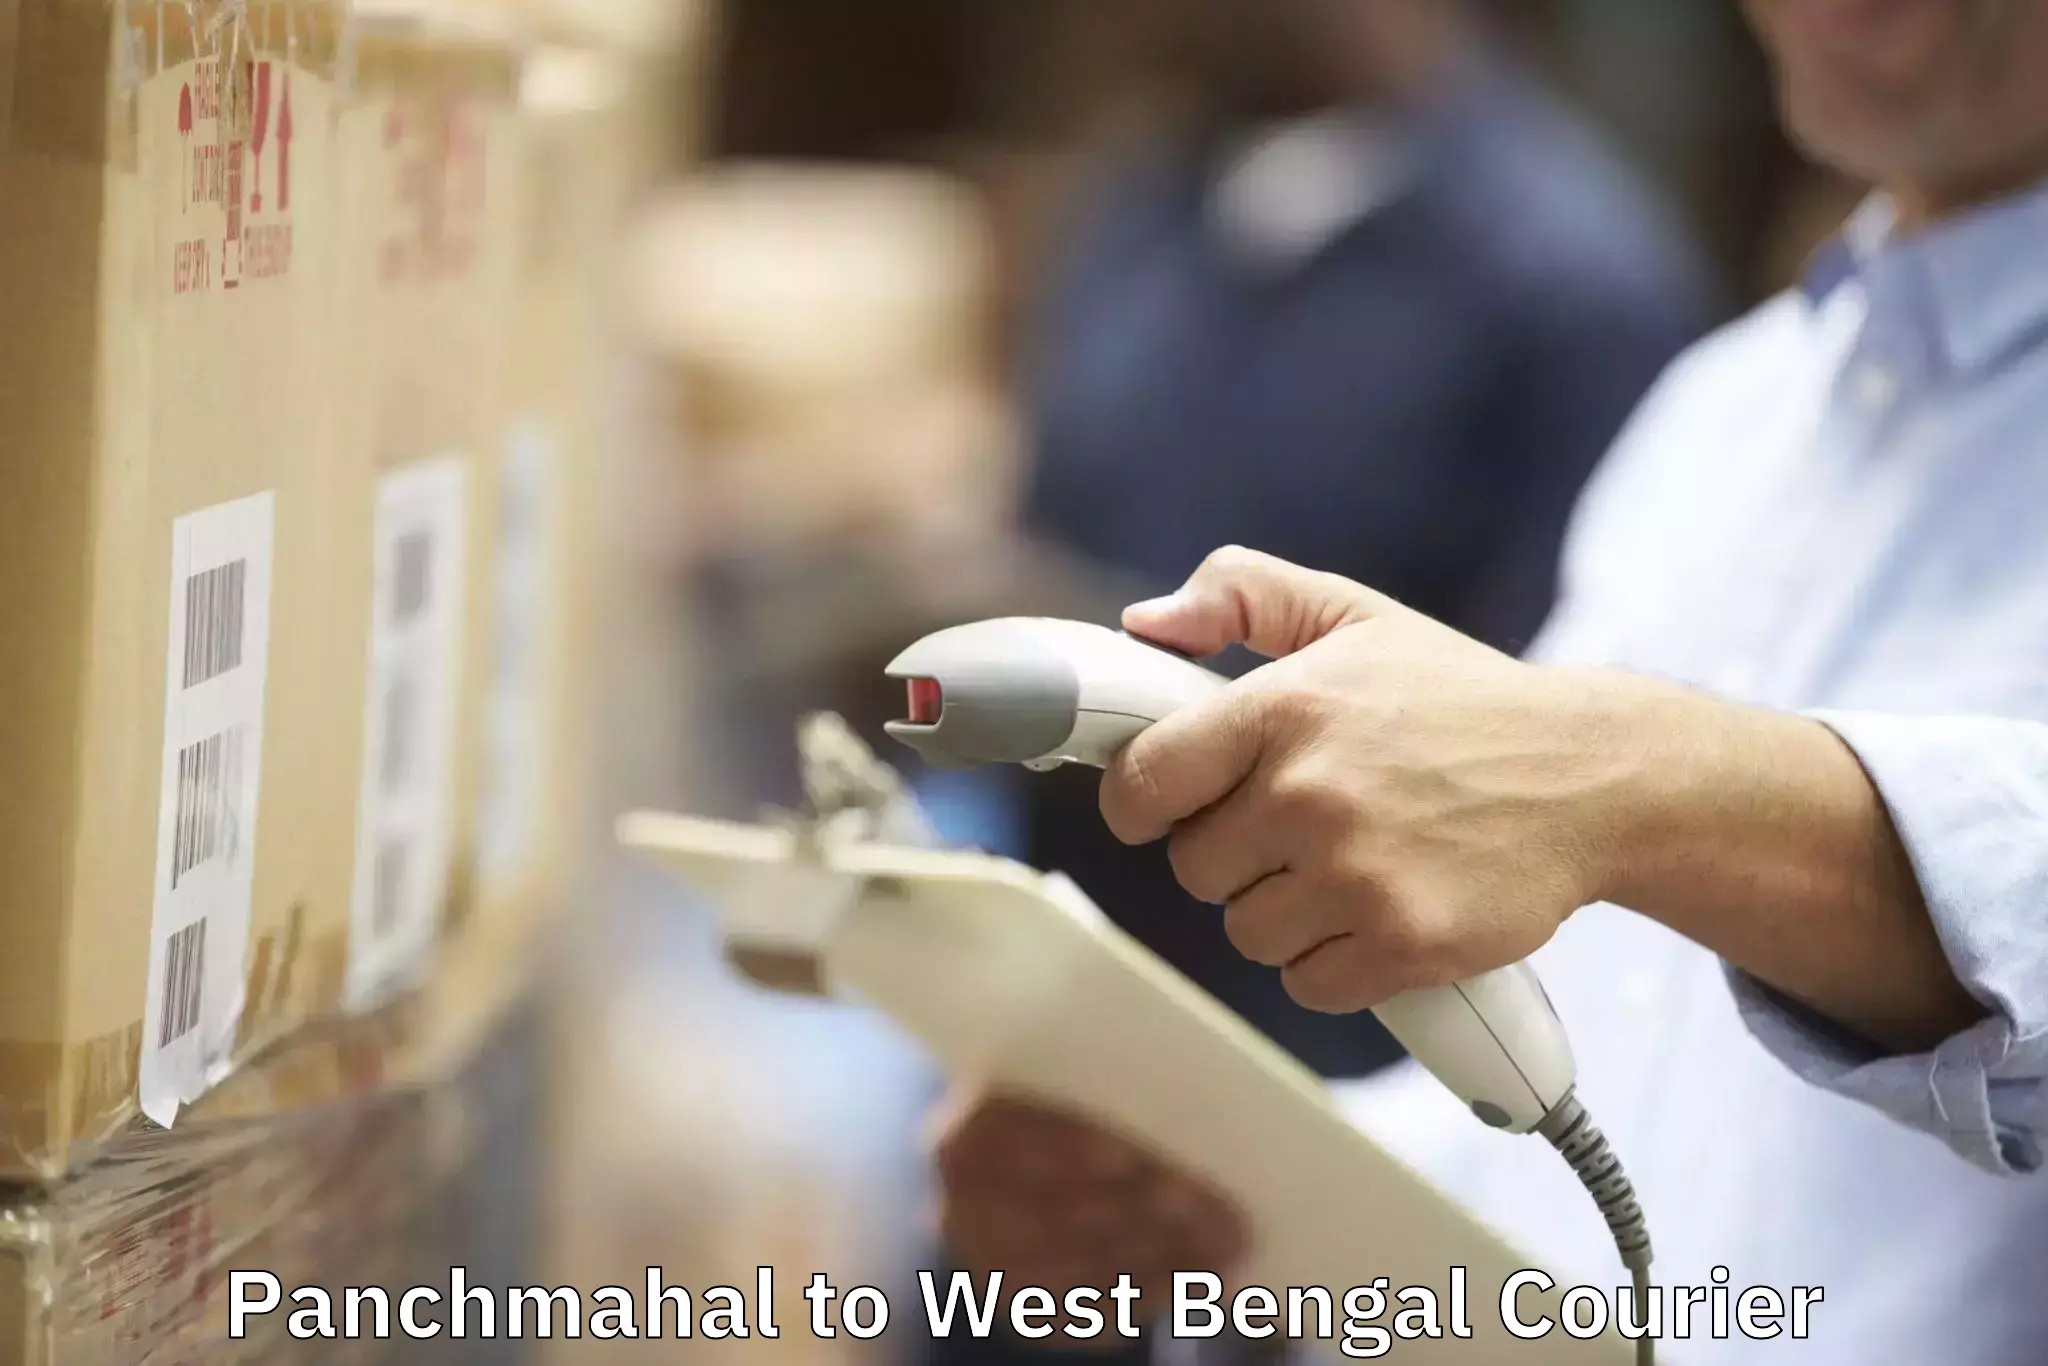 Furniture moving experts Panchmahal to West Bengal